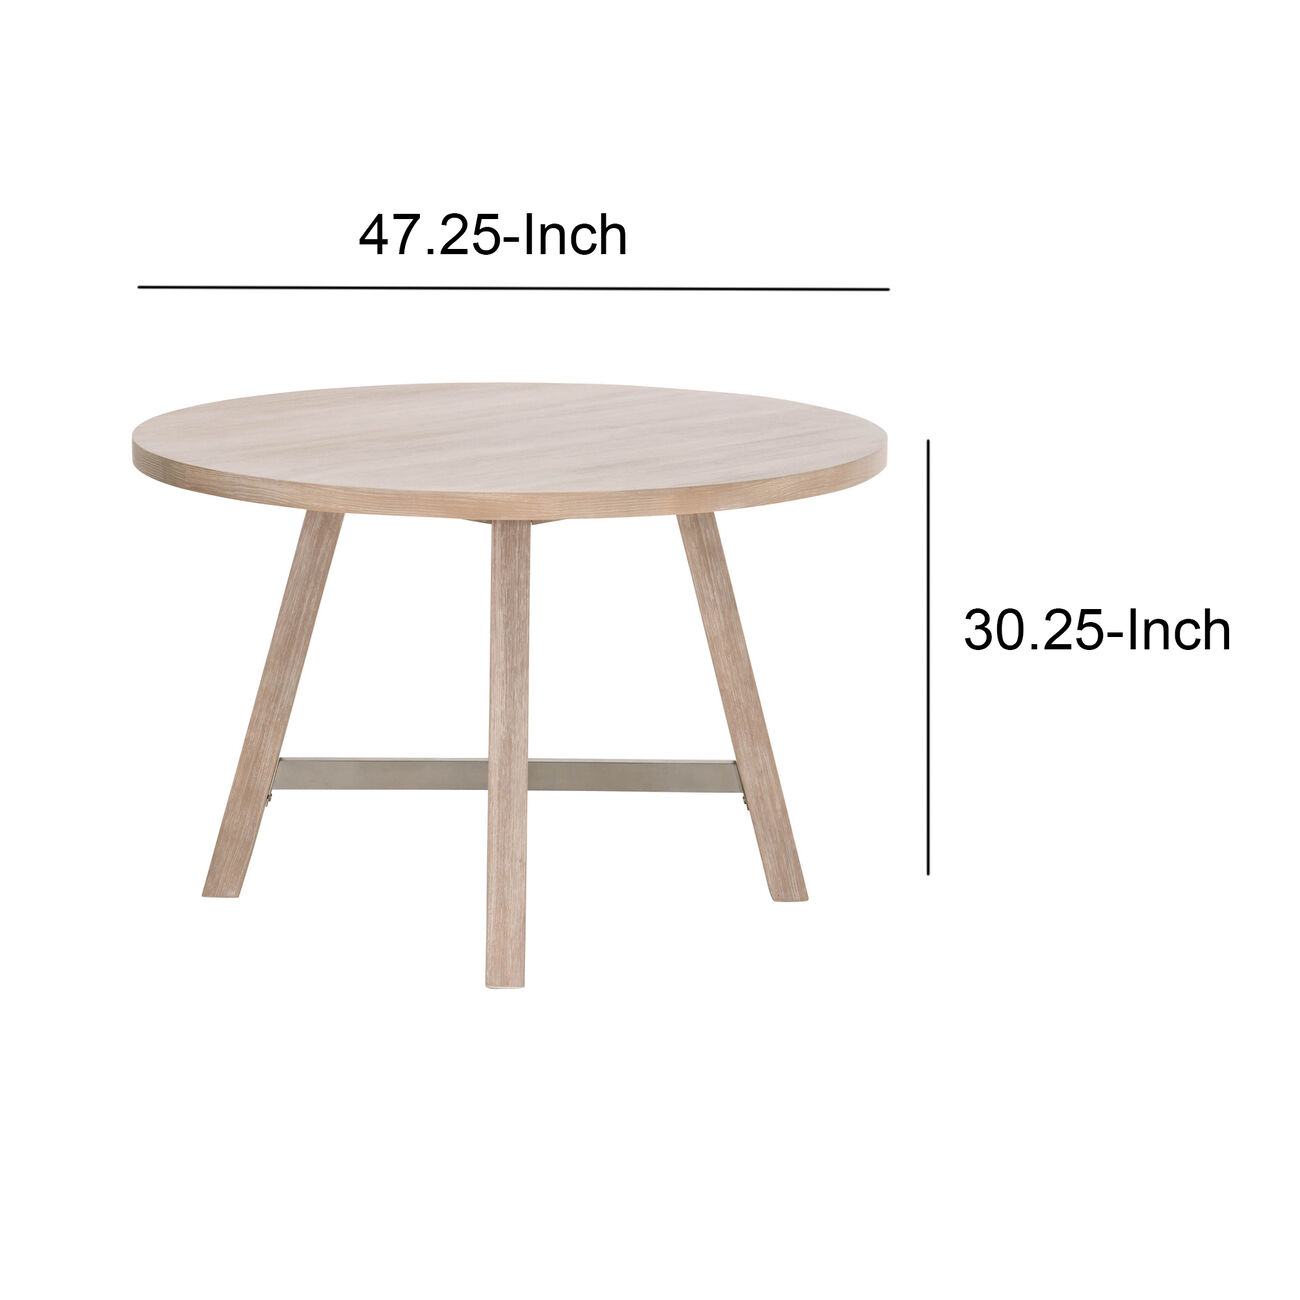 Grained Round Wooden Frame Dining Table with Metal Cross Bar, Brown